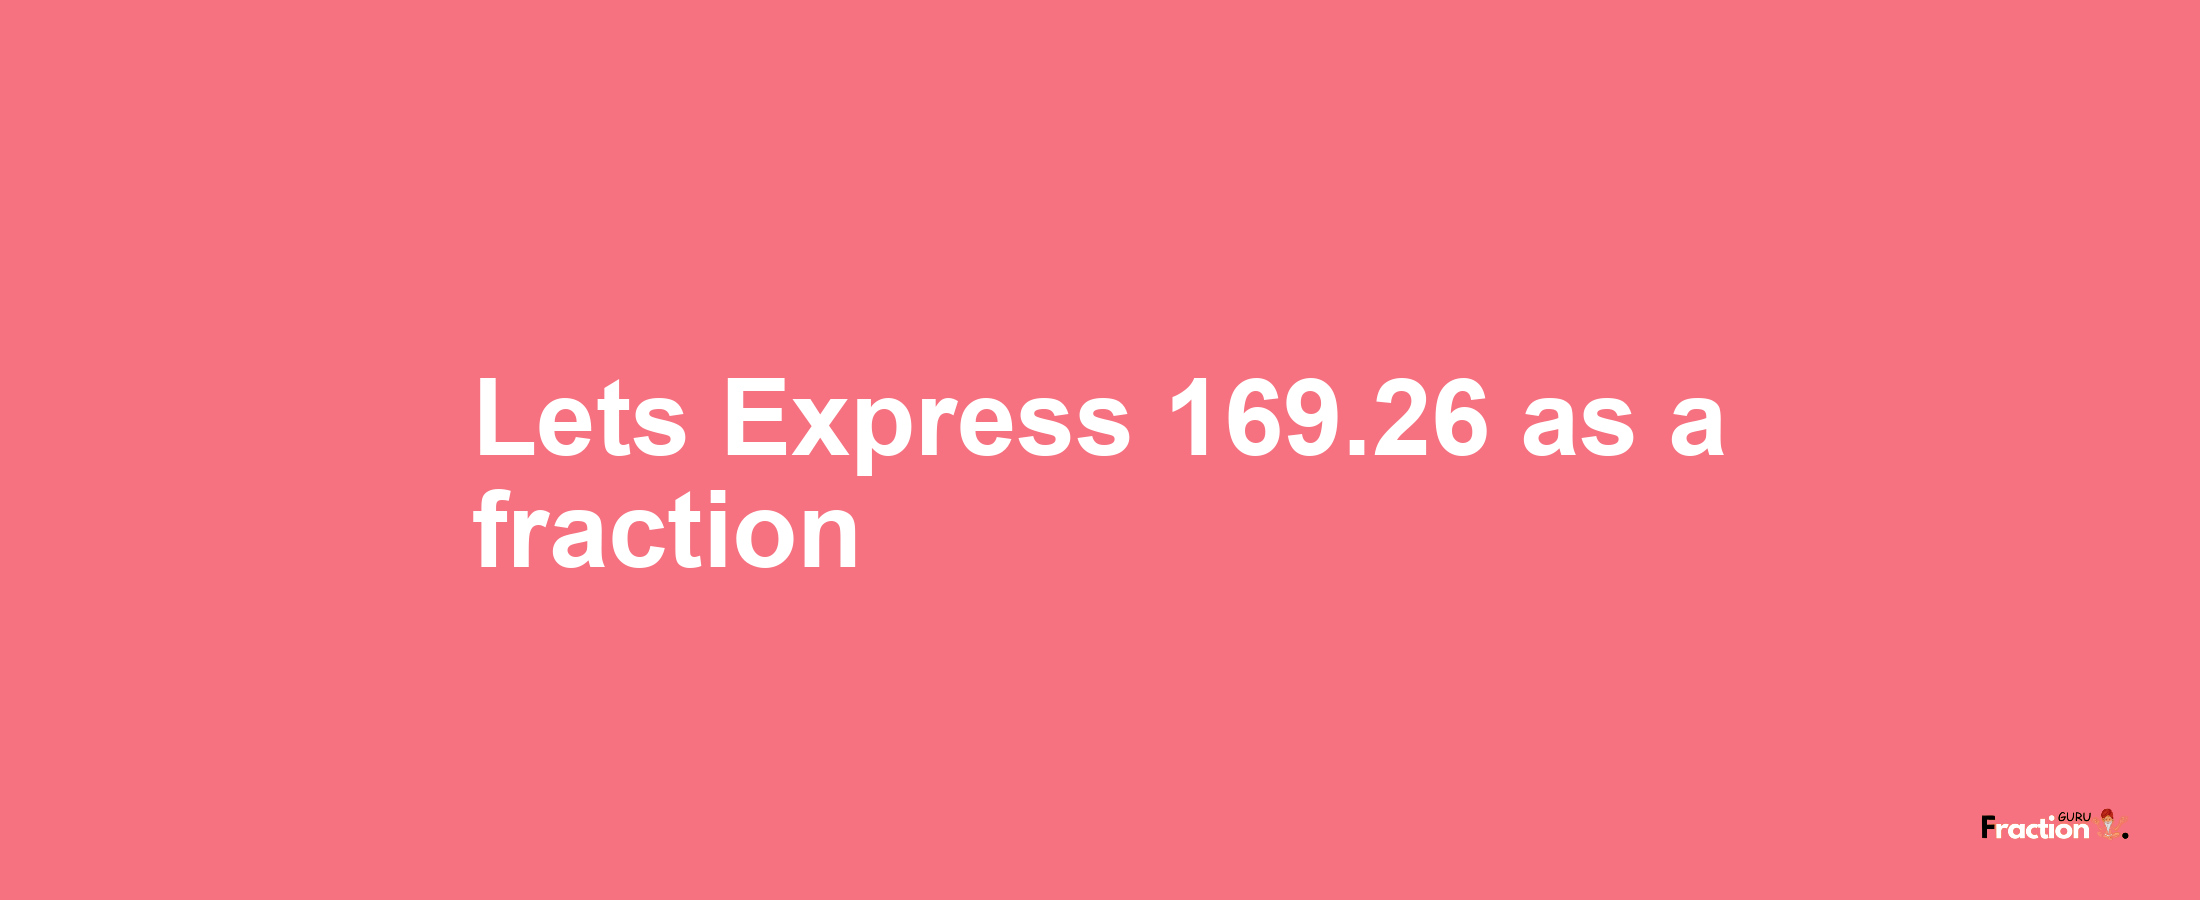 Lets Express 169.26 as afraction